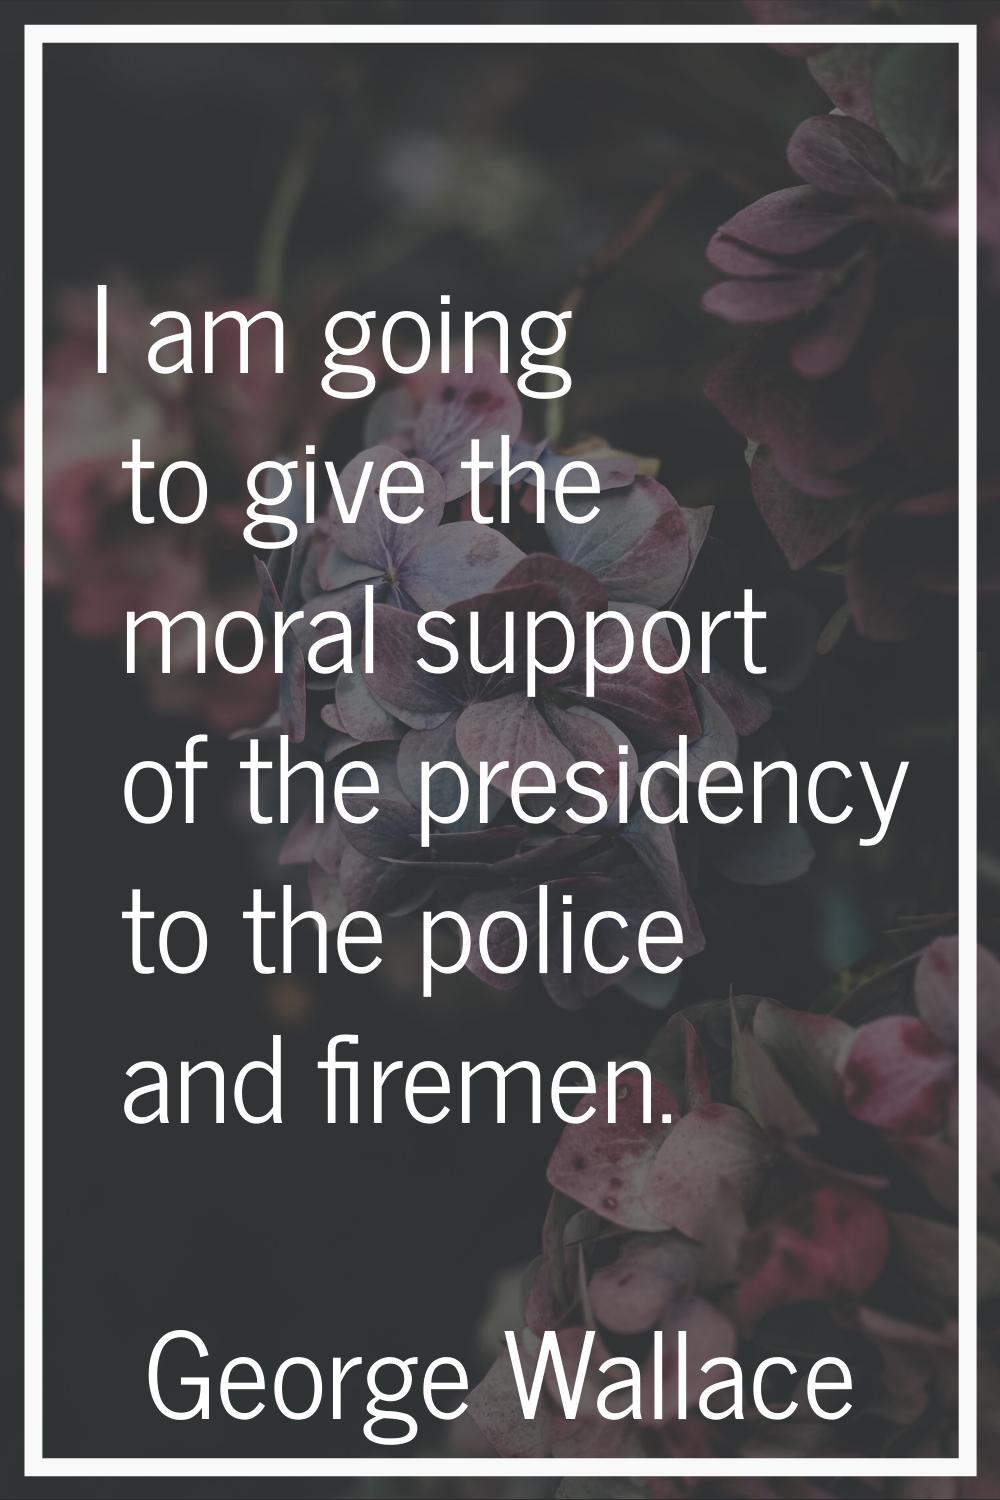 I am going to give the moral support of the presidency to the police and firemen.